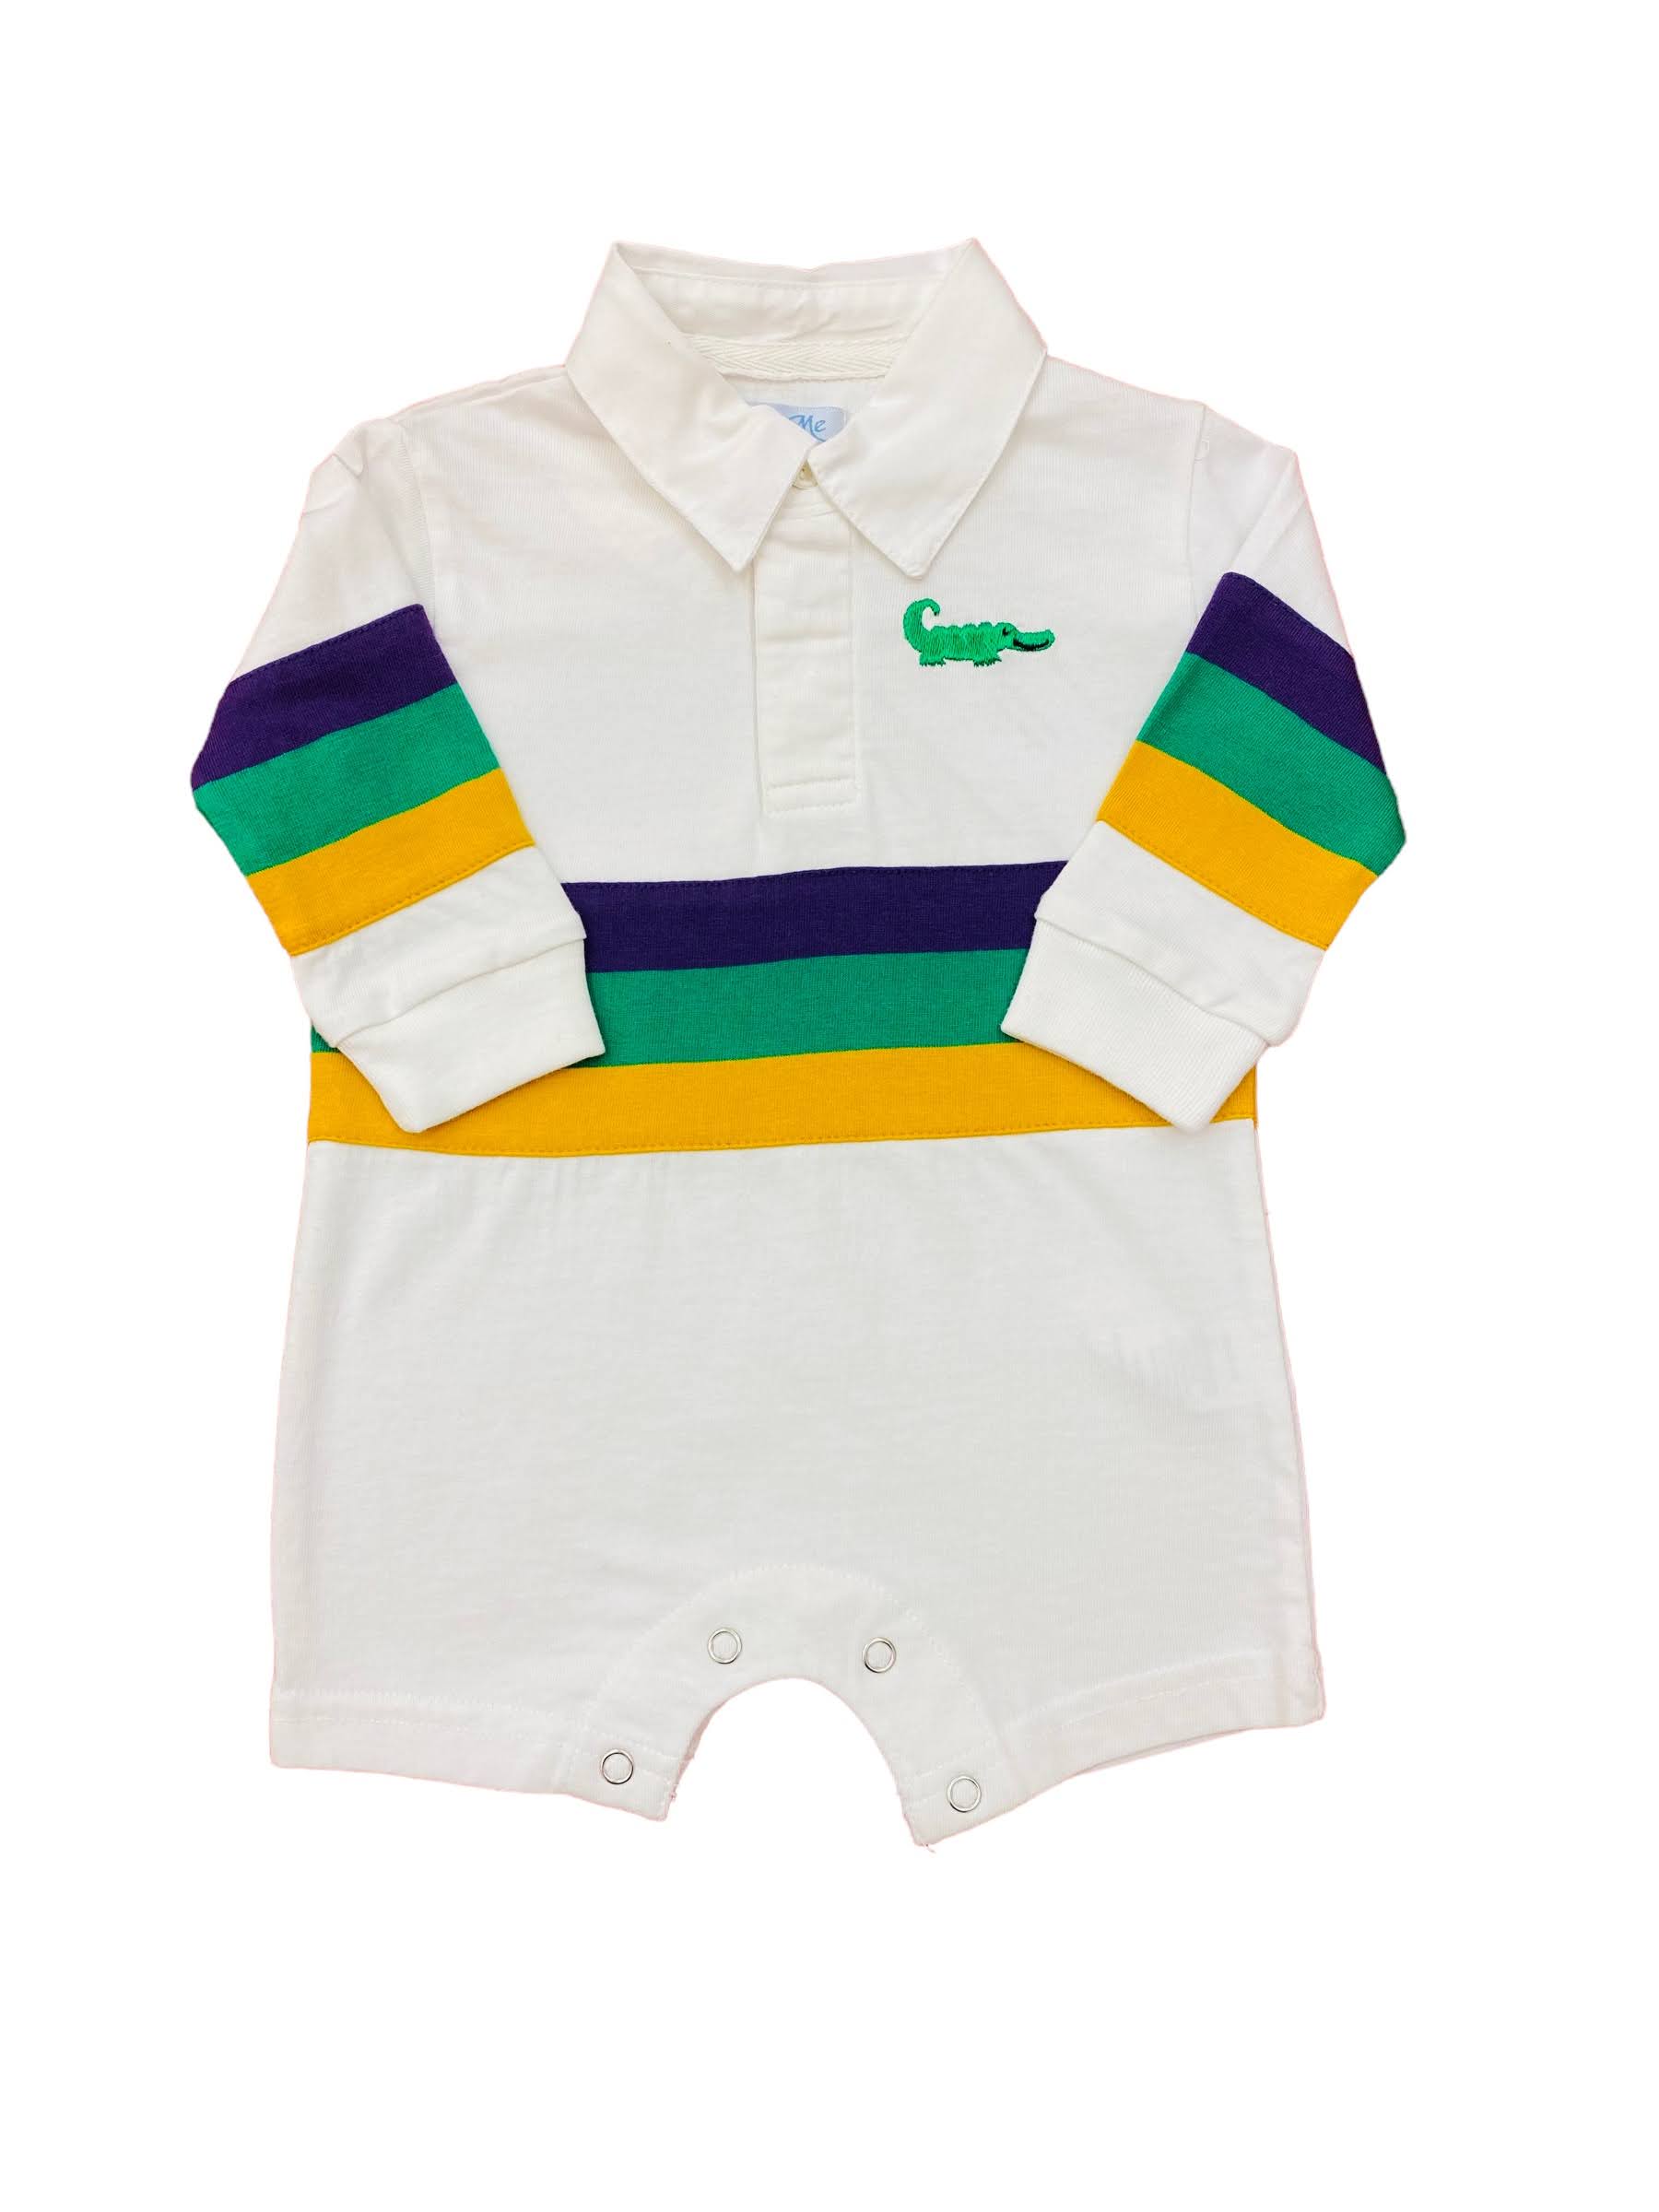 A white Rugby Long Sleeve Mardi Gras Shortall with a green, yellow and purple stripe, perfect for Mardi Gras festivities by Lulu Bebe.